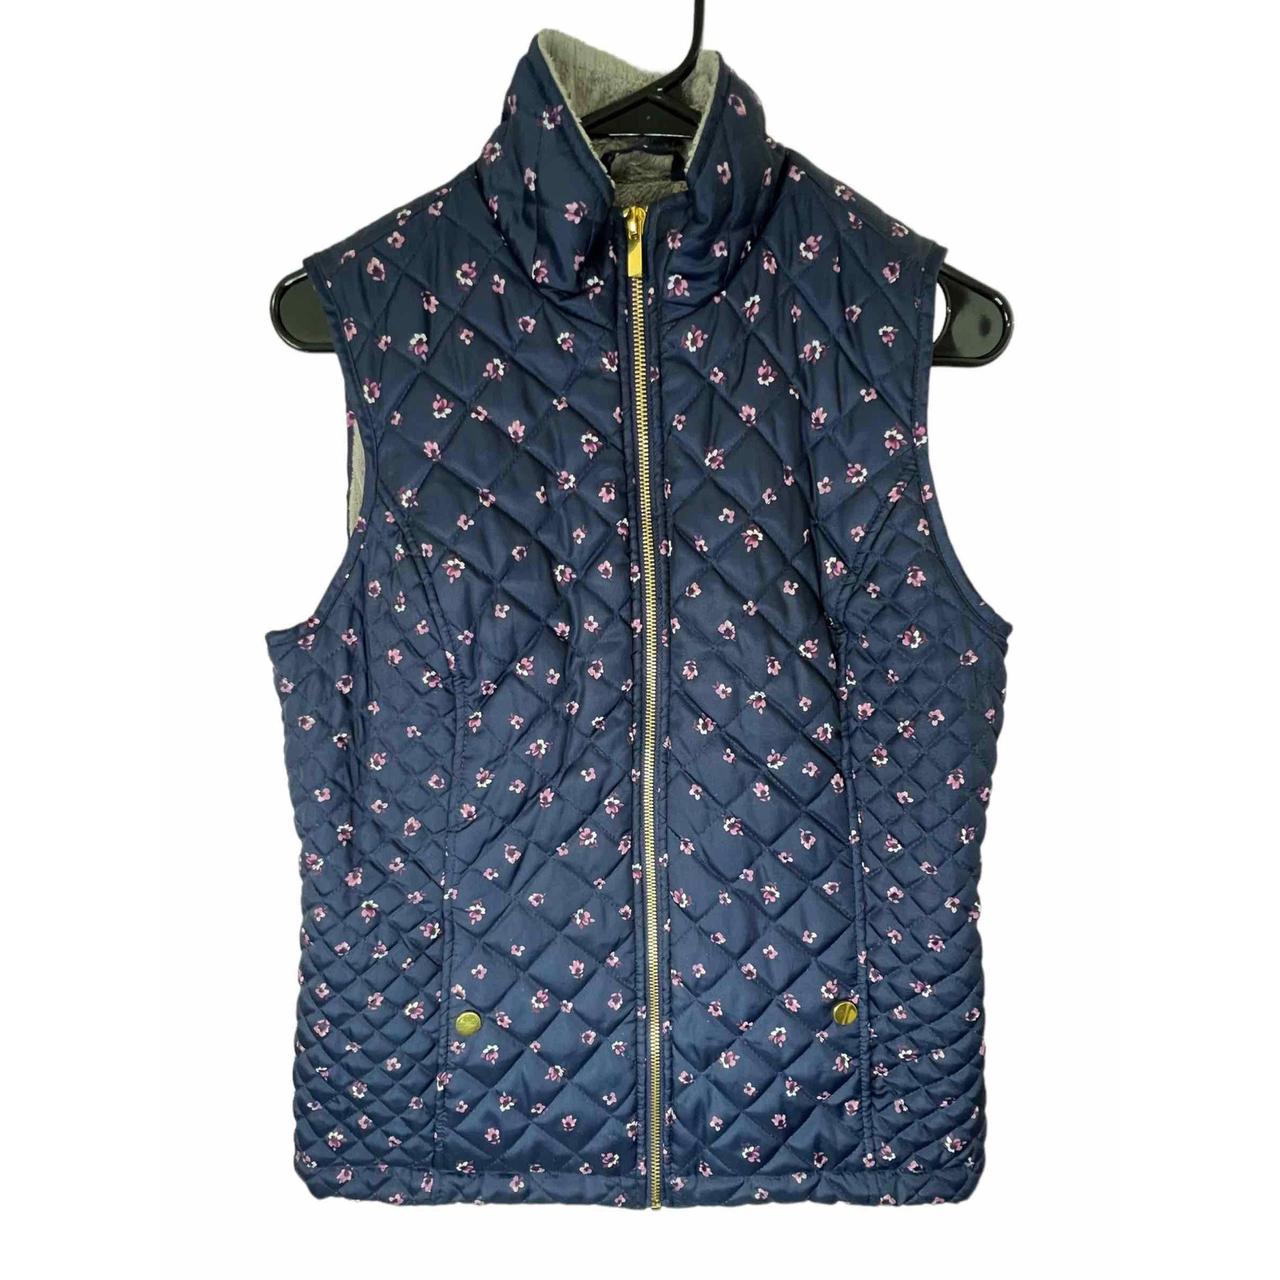 Basic Editions Women's Blue and Pink Gilet